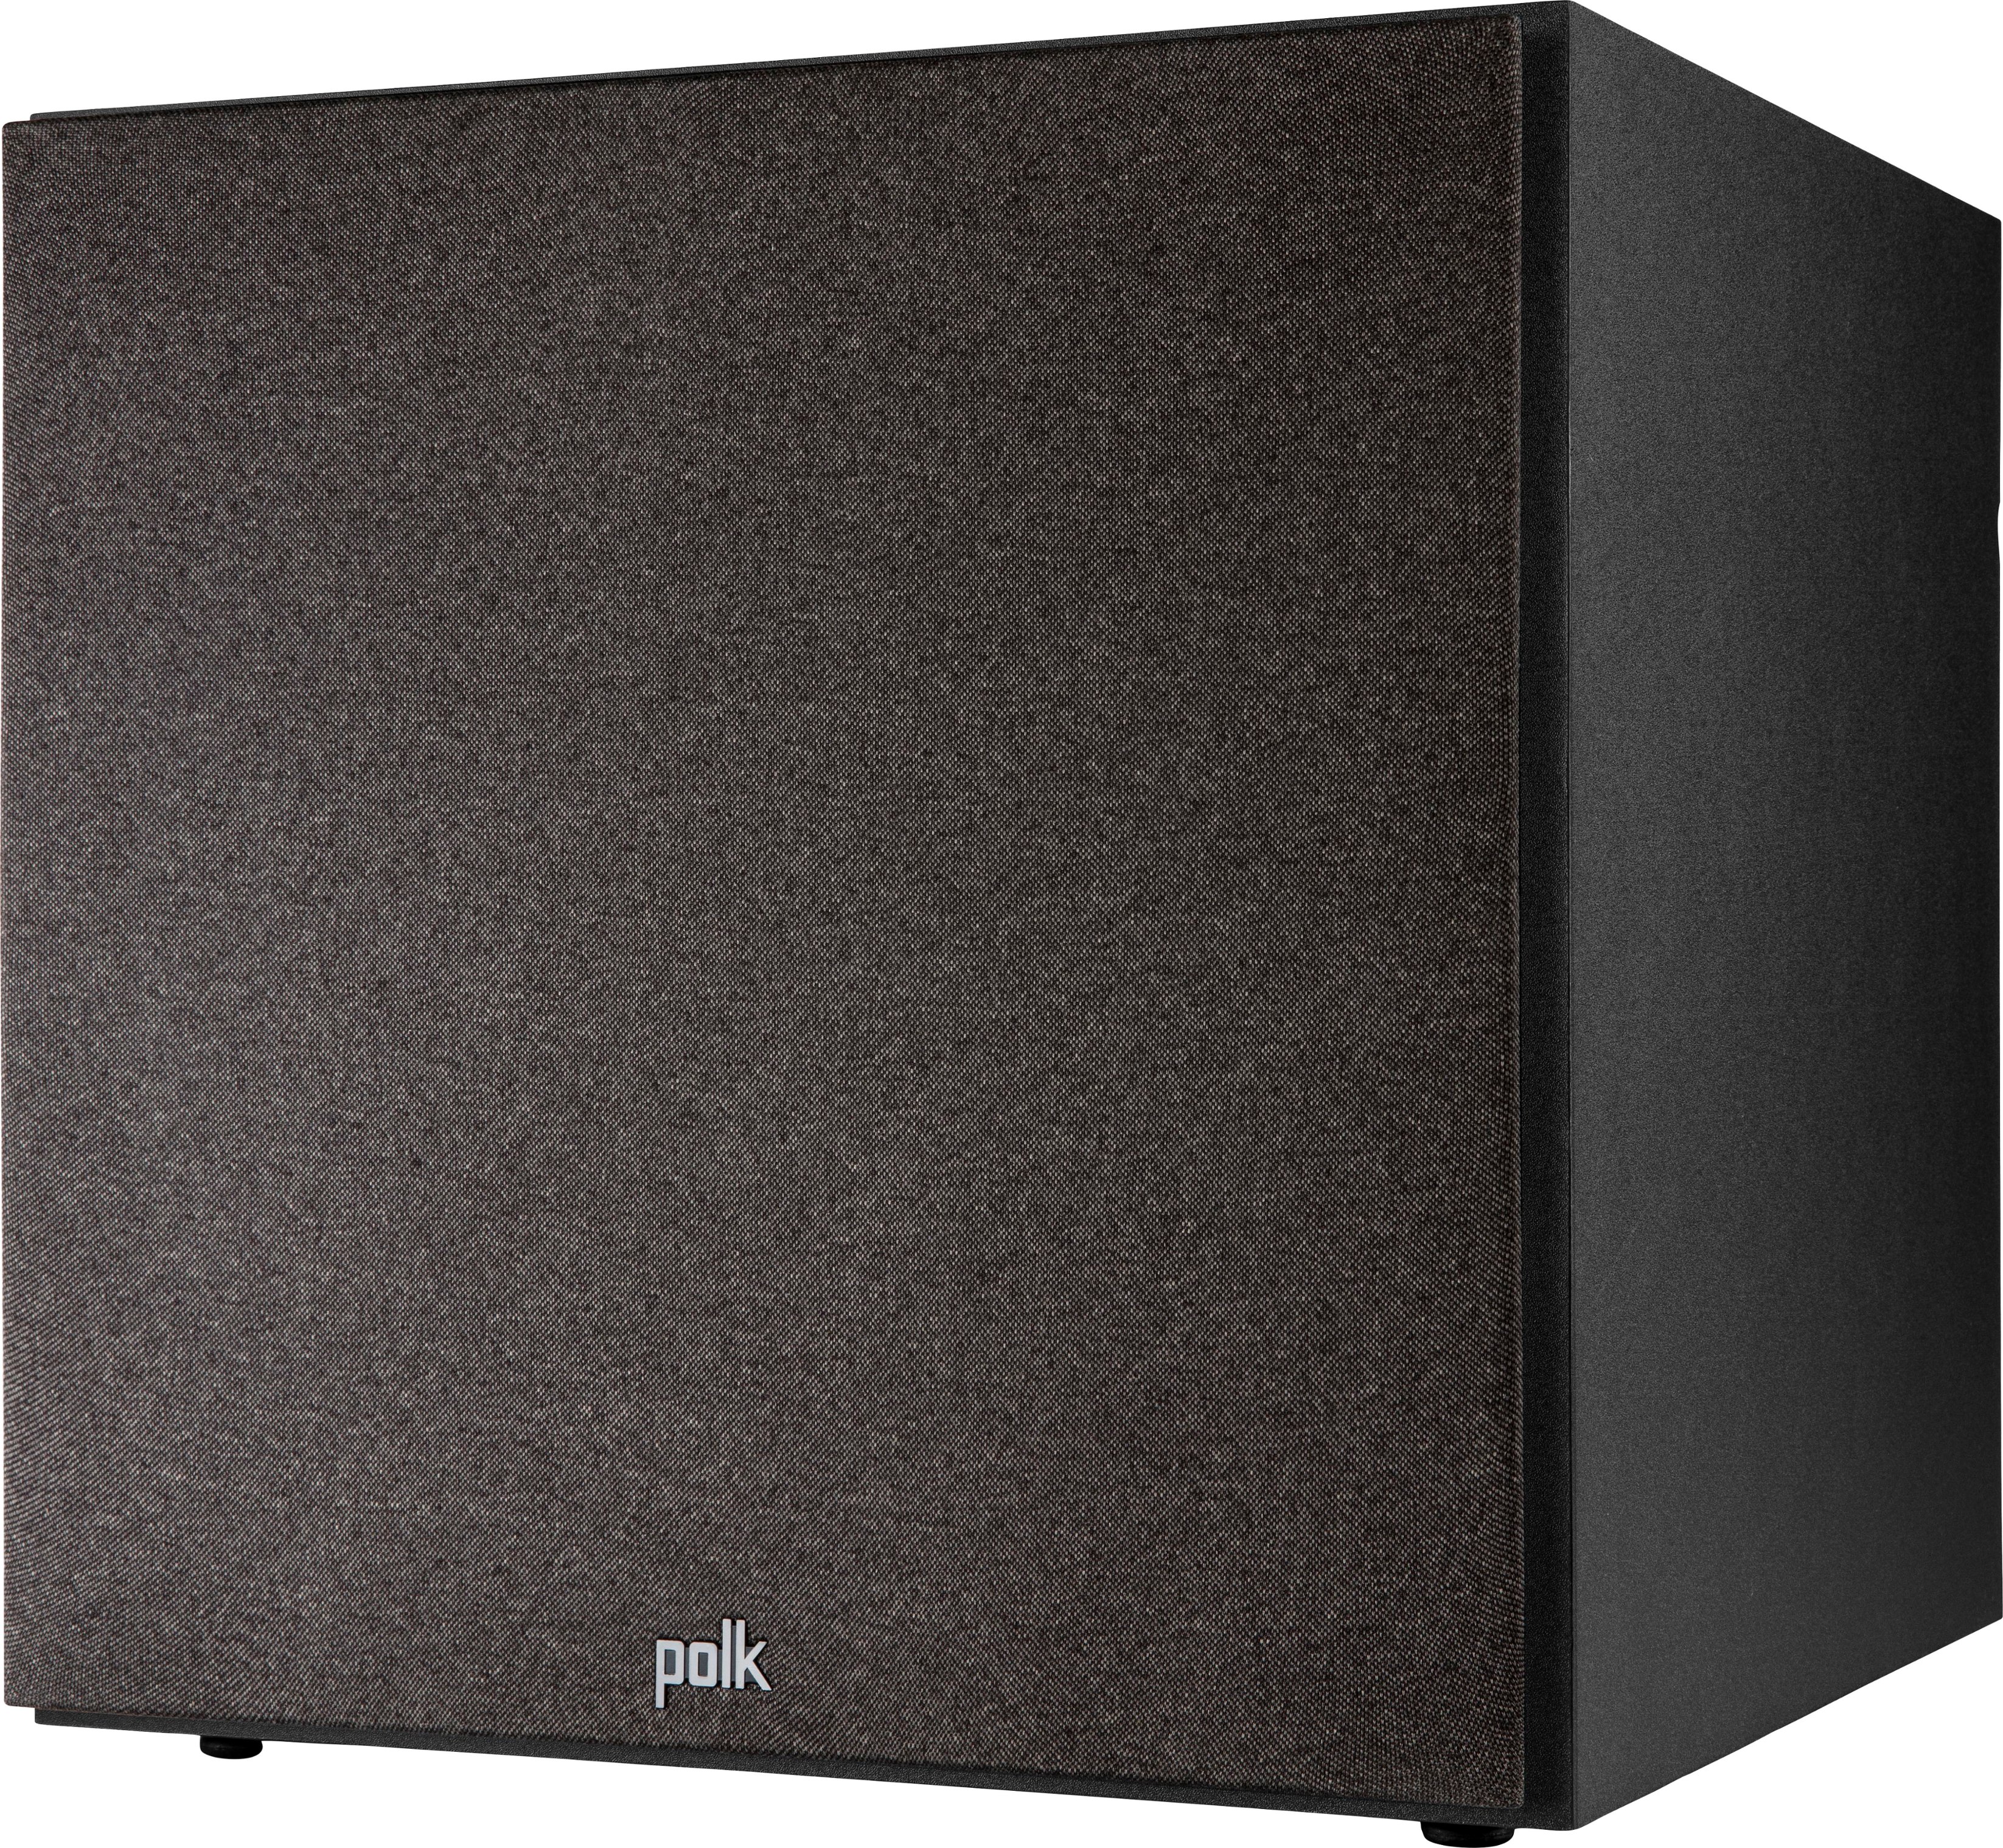 Angle View: Polk Audio - Polk – Magnifi 2 Home Theater Sound Bar with 3D Audio, 4k Compatible, Chromecast built in, wireless subwoofer - Black